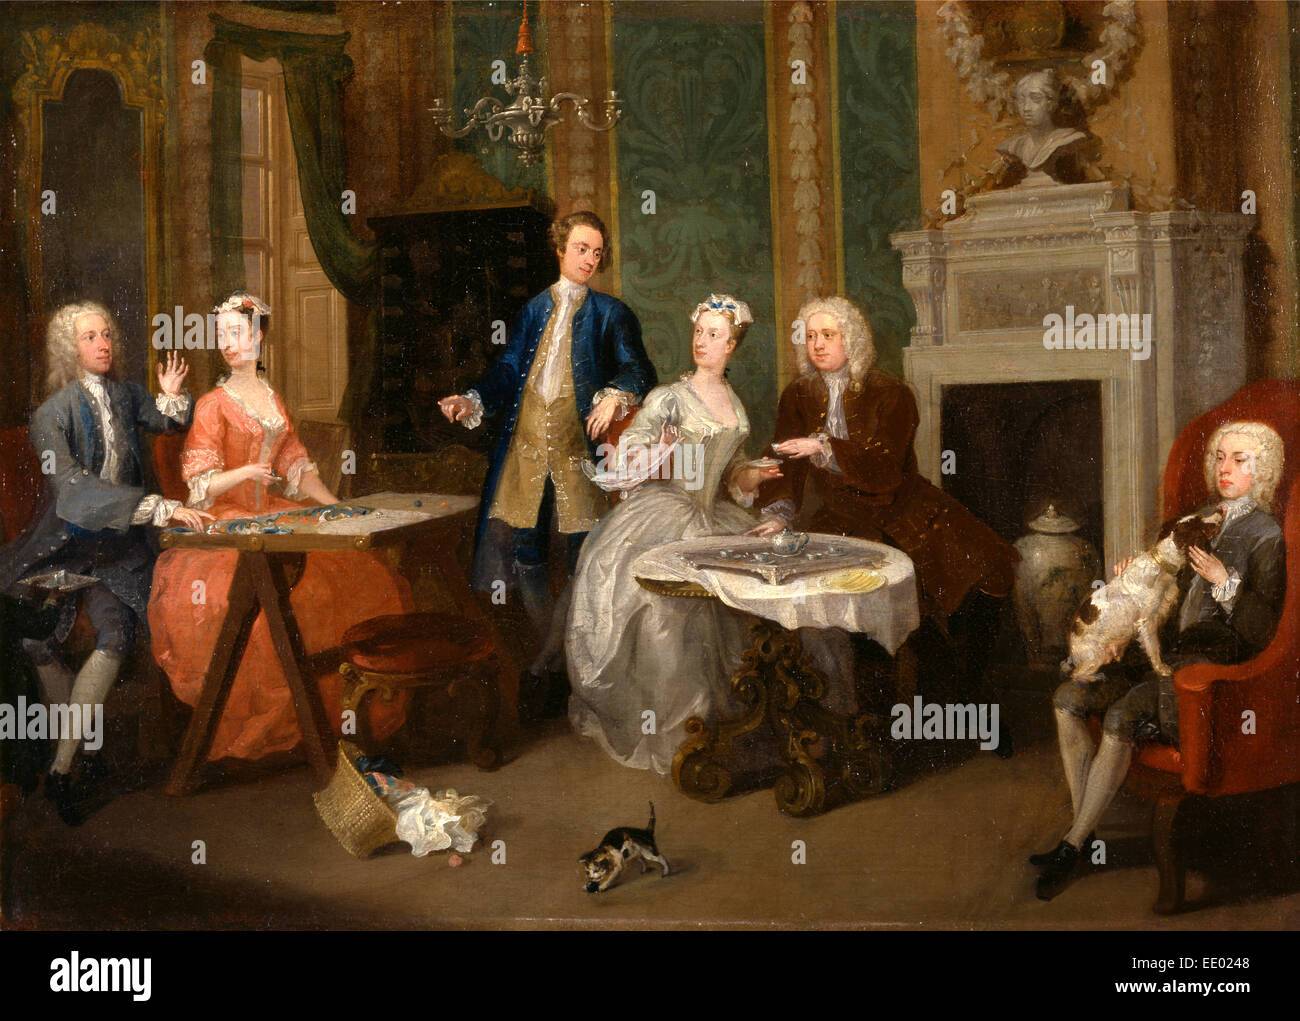 Portrait of a Family A Family Party, William Hogarth, 1697-1764, British Stock Photo